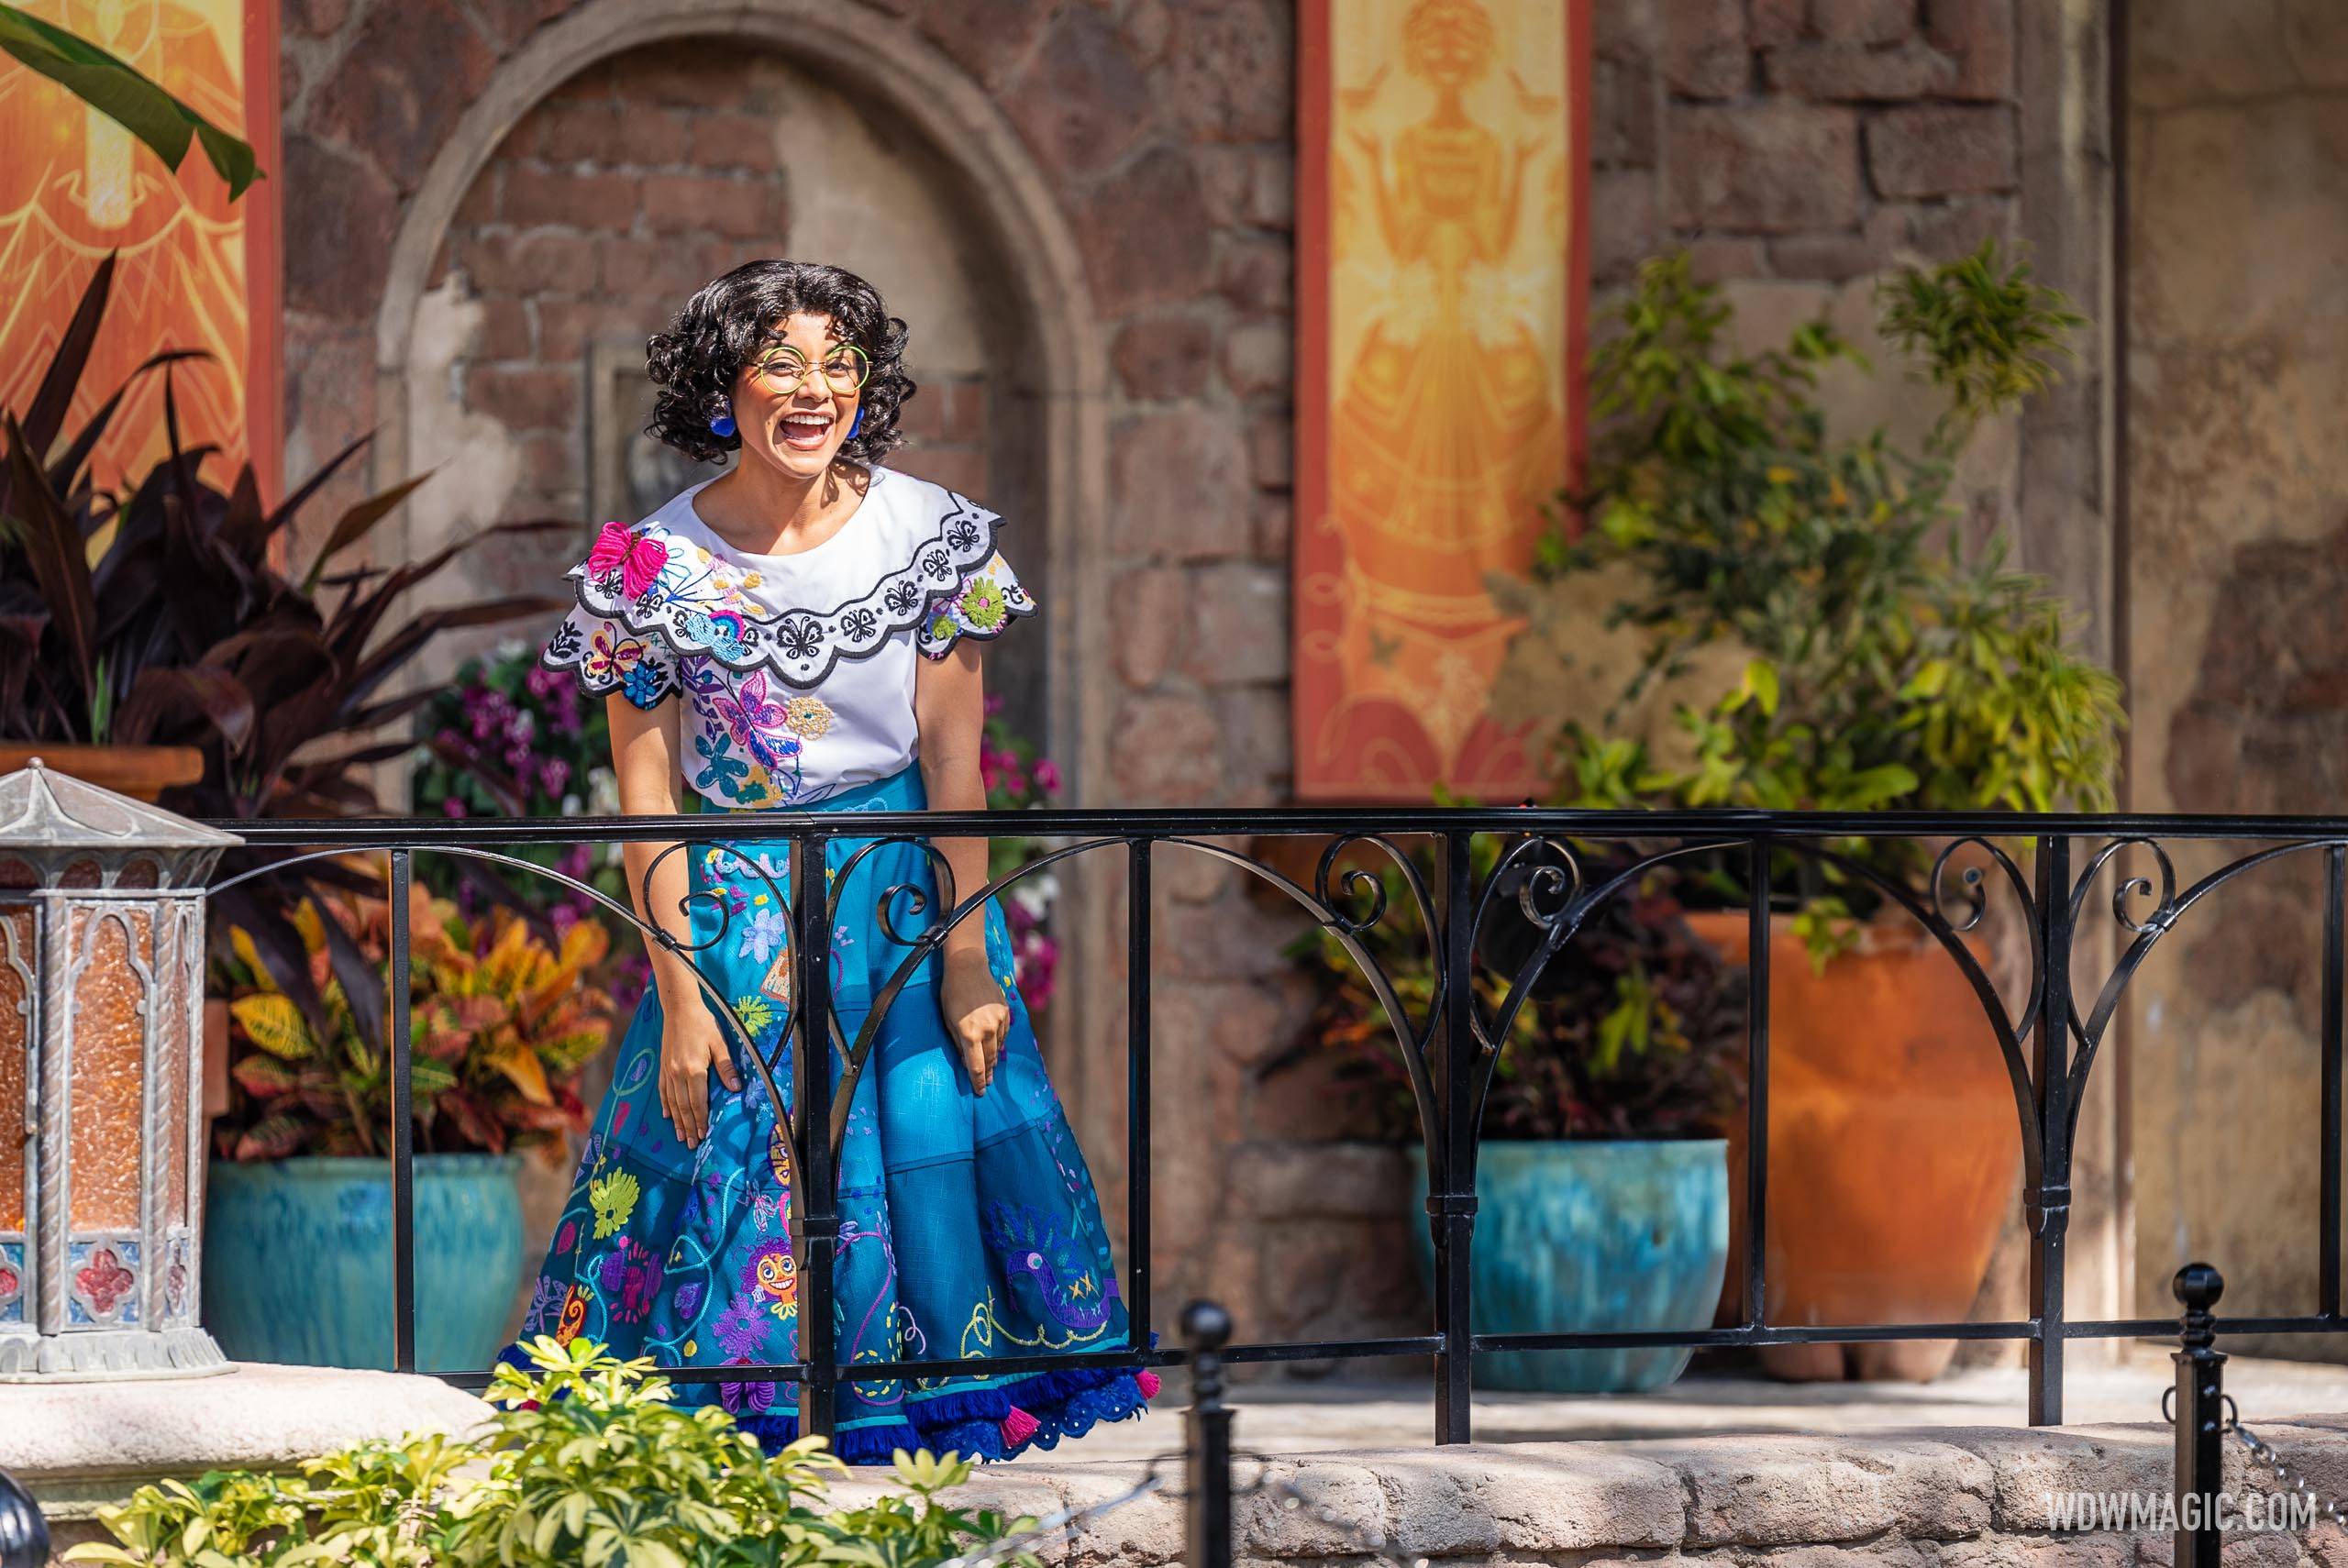 Magic Kingdom welcomes Encanto's Mirabel for meet and greets at Walt Disney World